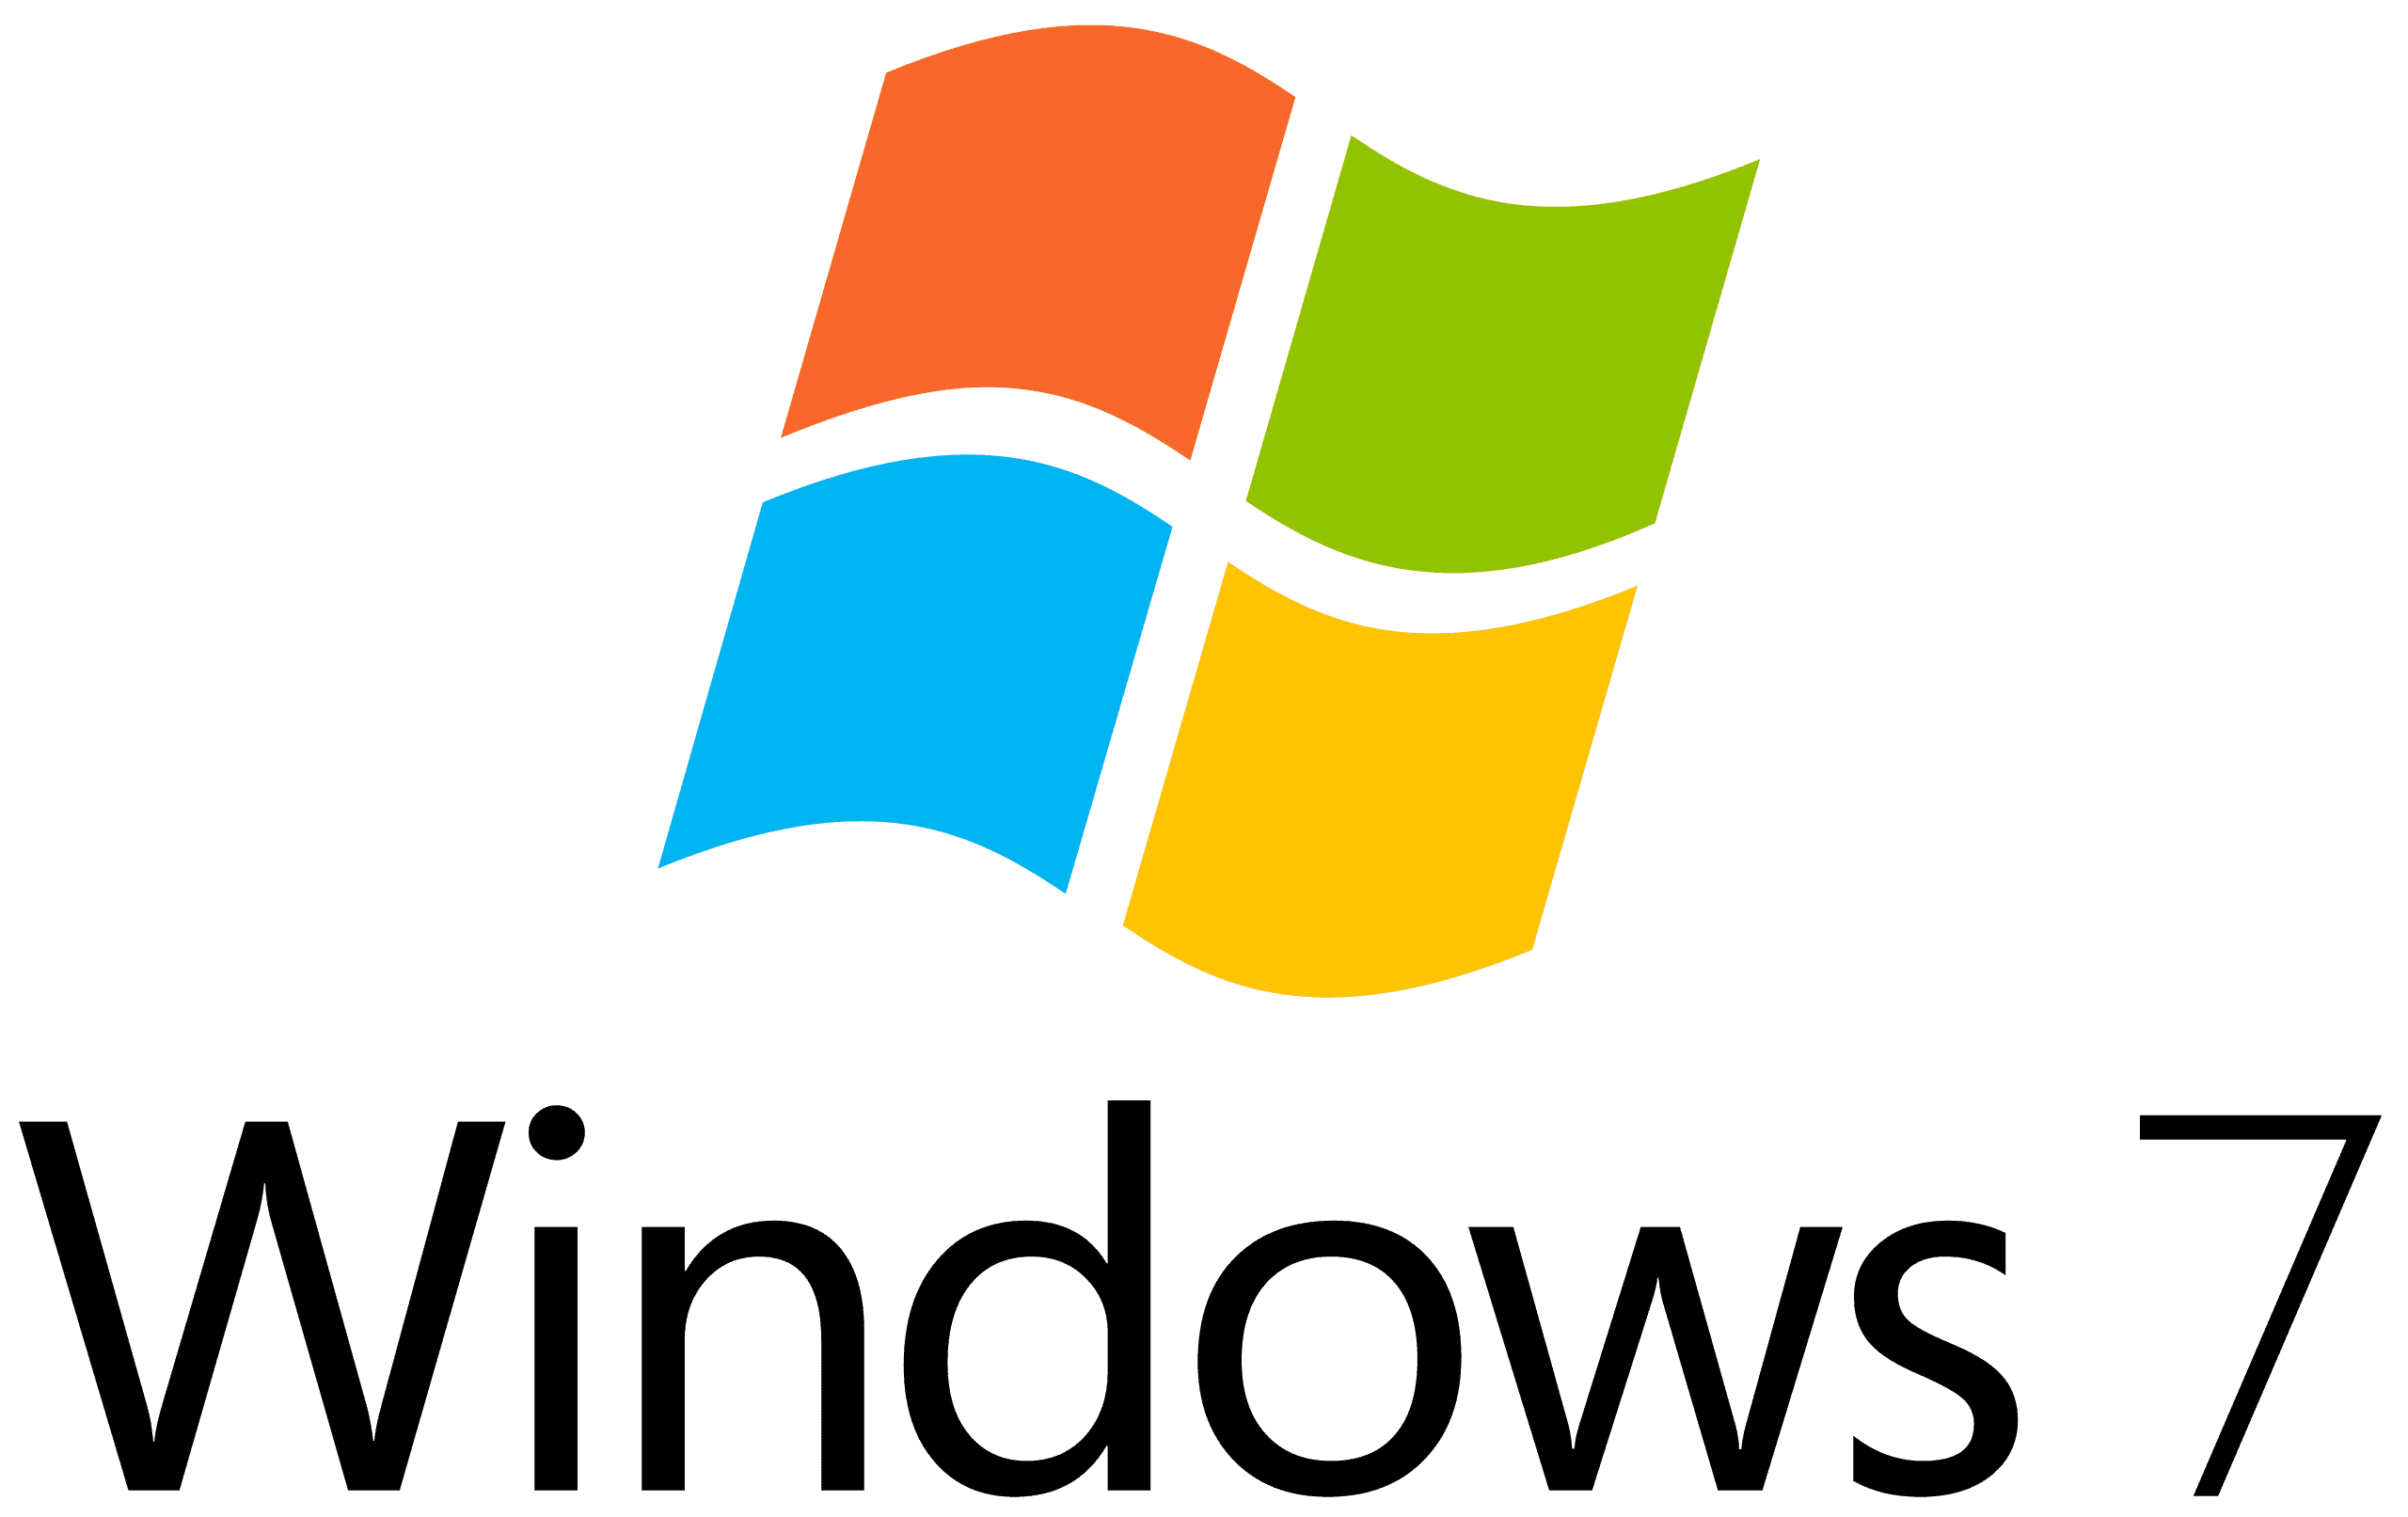 Windows 7 extended support